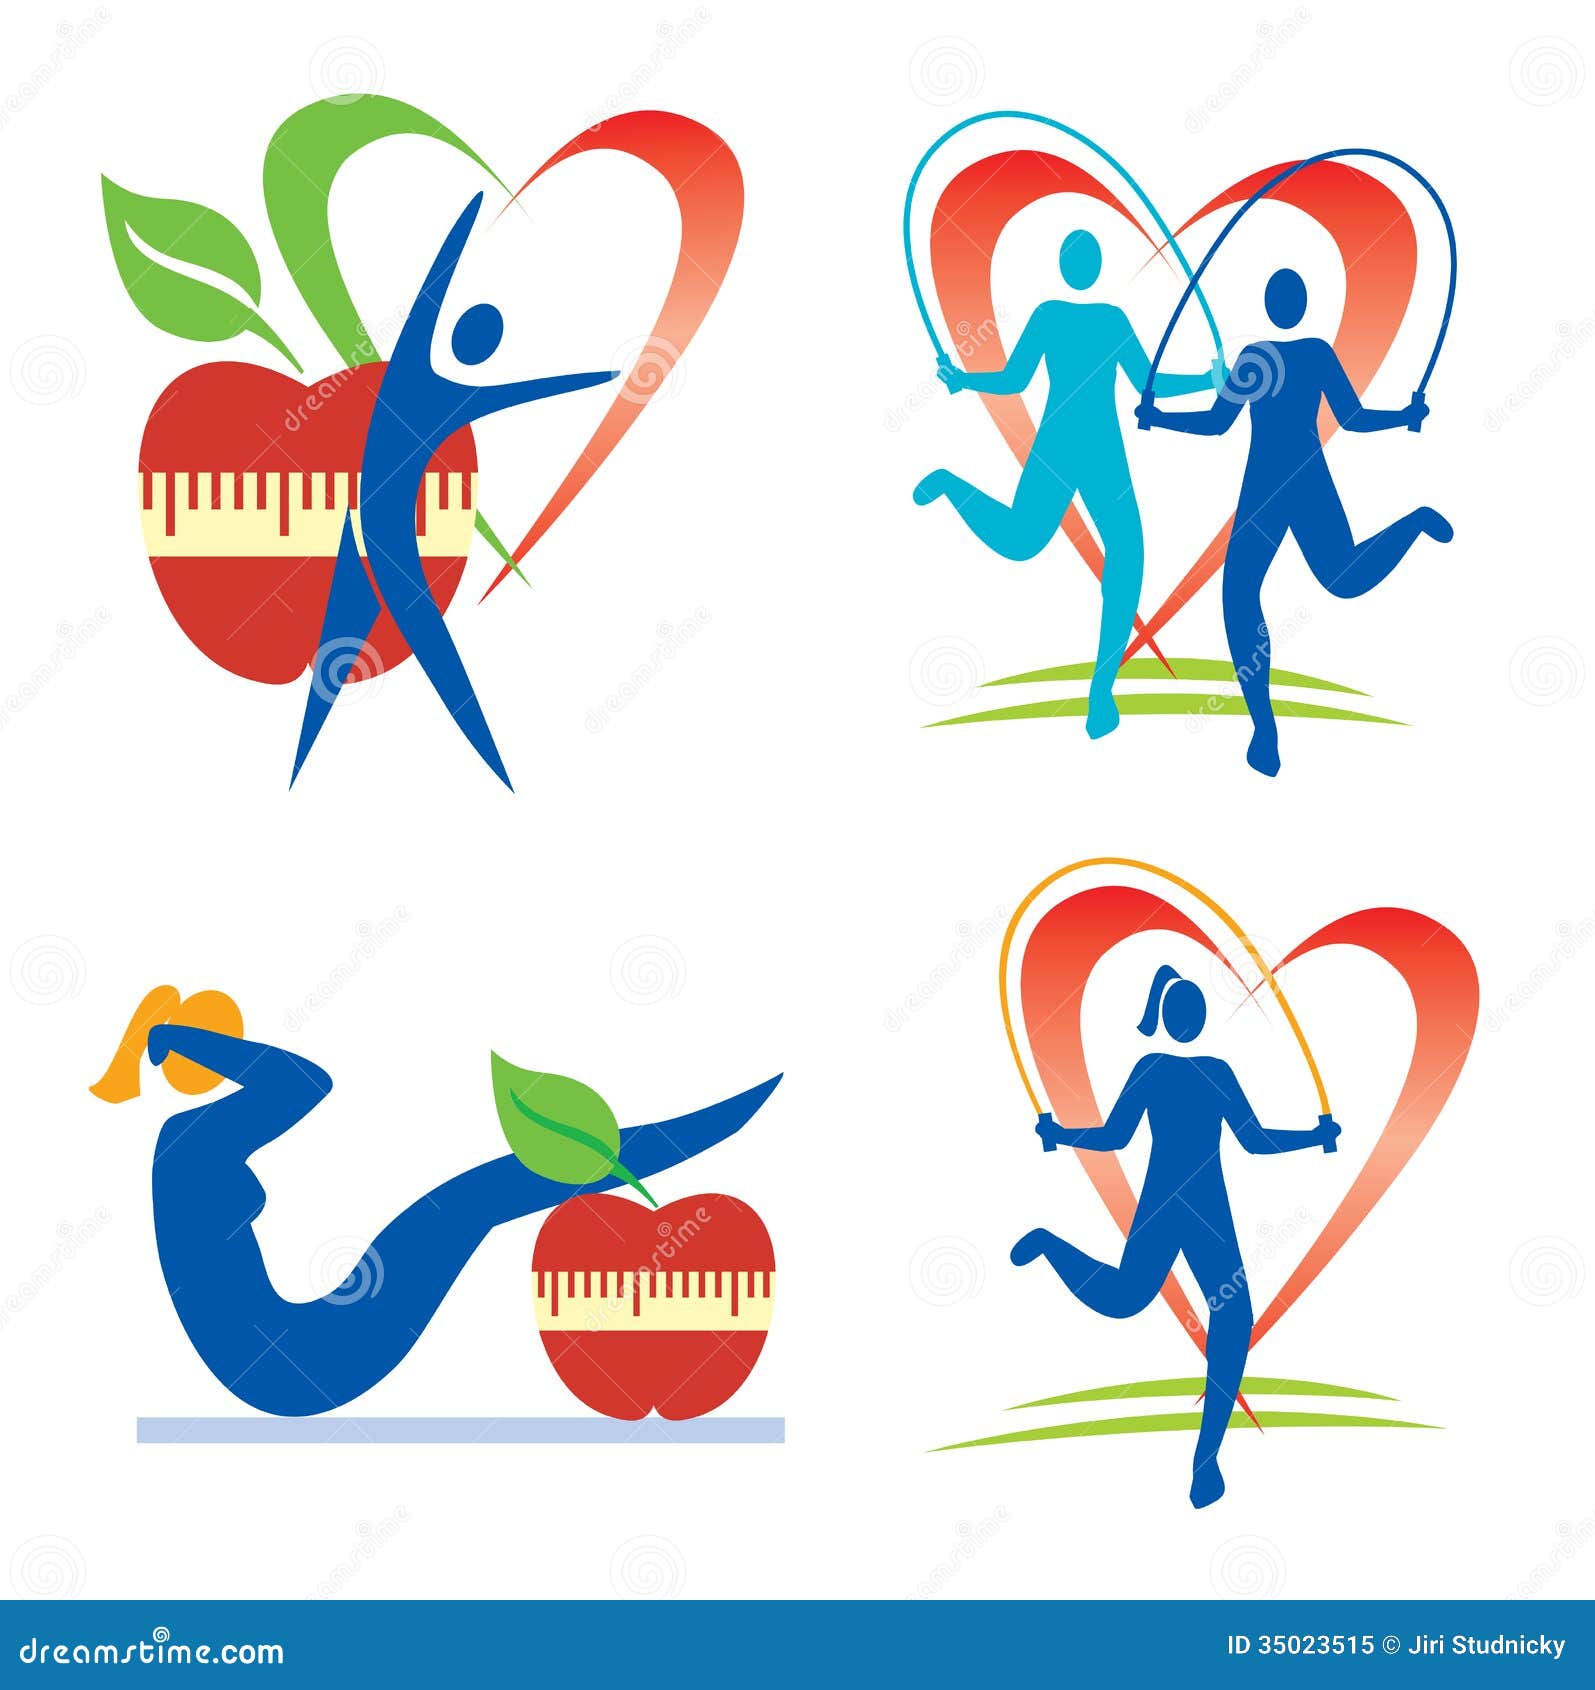 fitness-health-icons-healthy-lifestyle-activities-symbols-vector-illustration-35023515.jpg